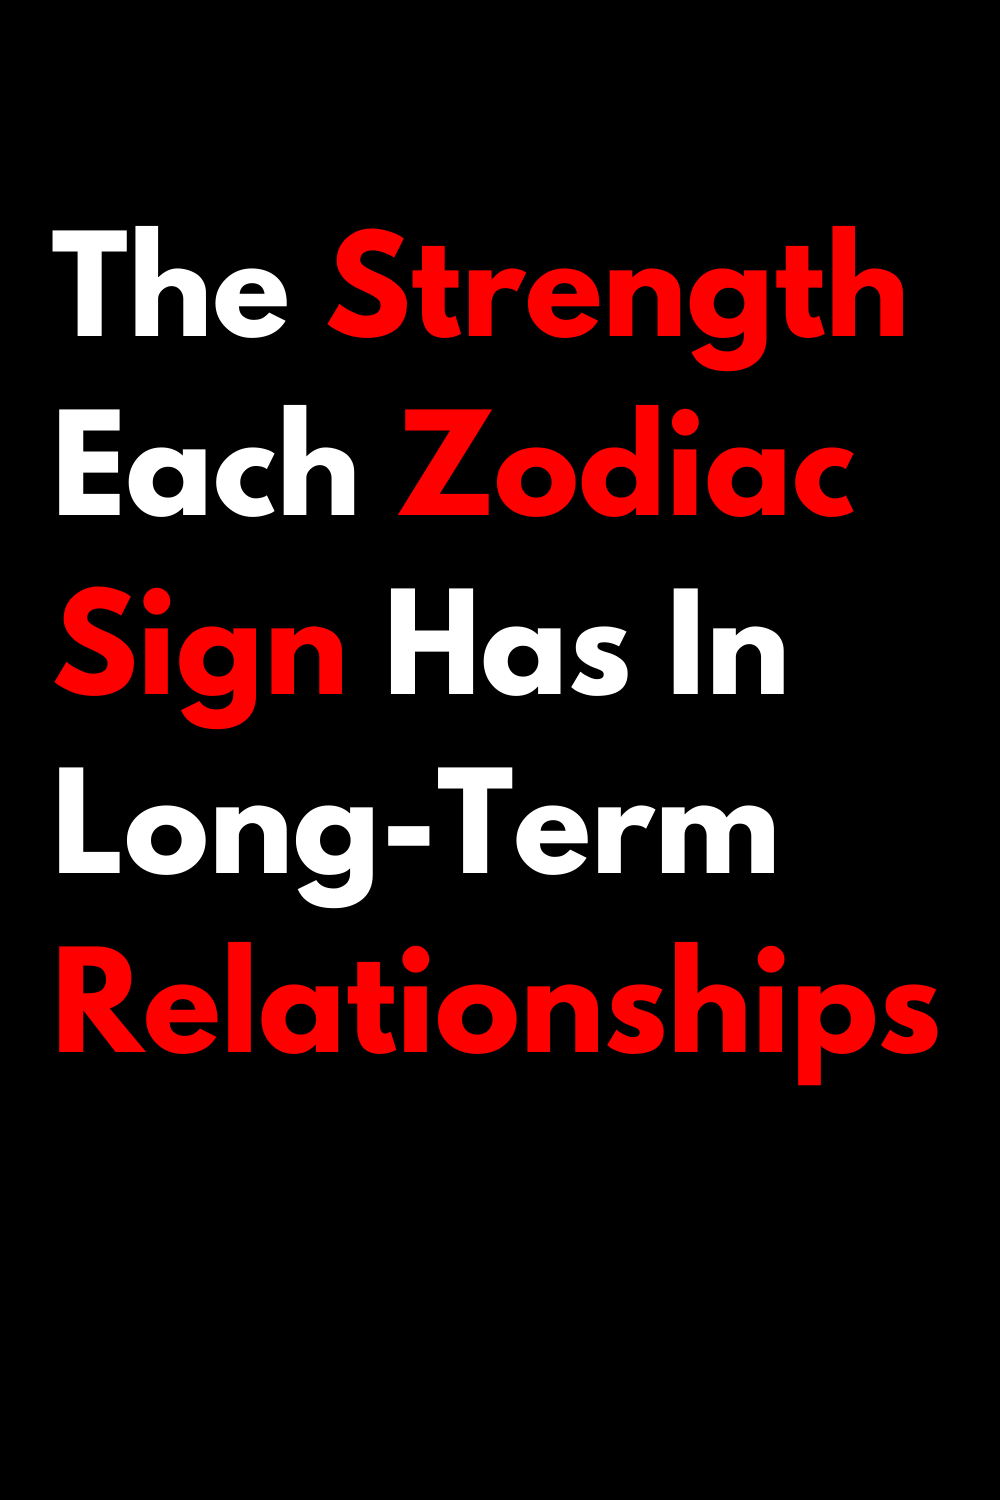 The Strength Each Zodiac Sign Has In Long-Term Relationships